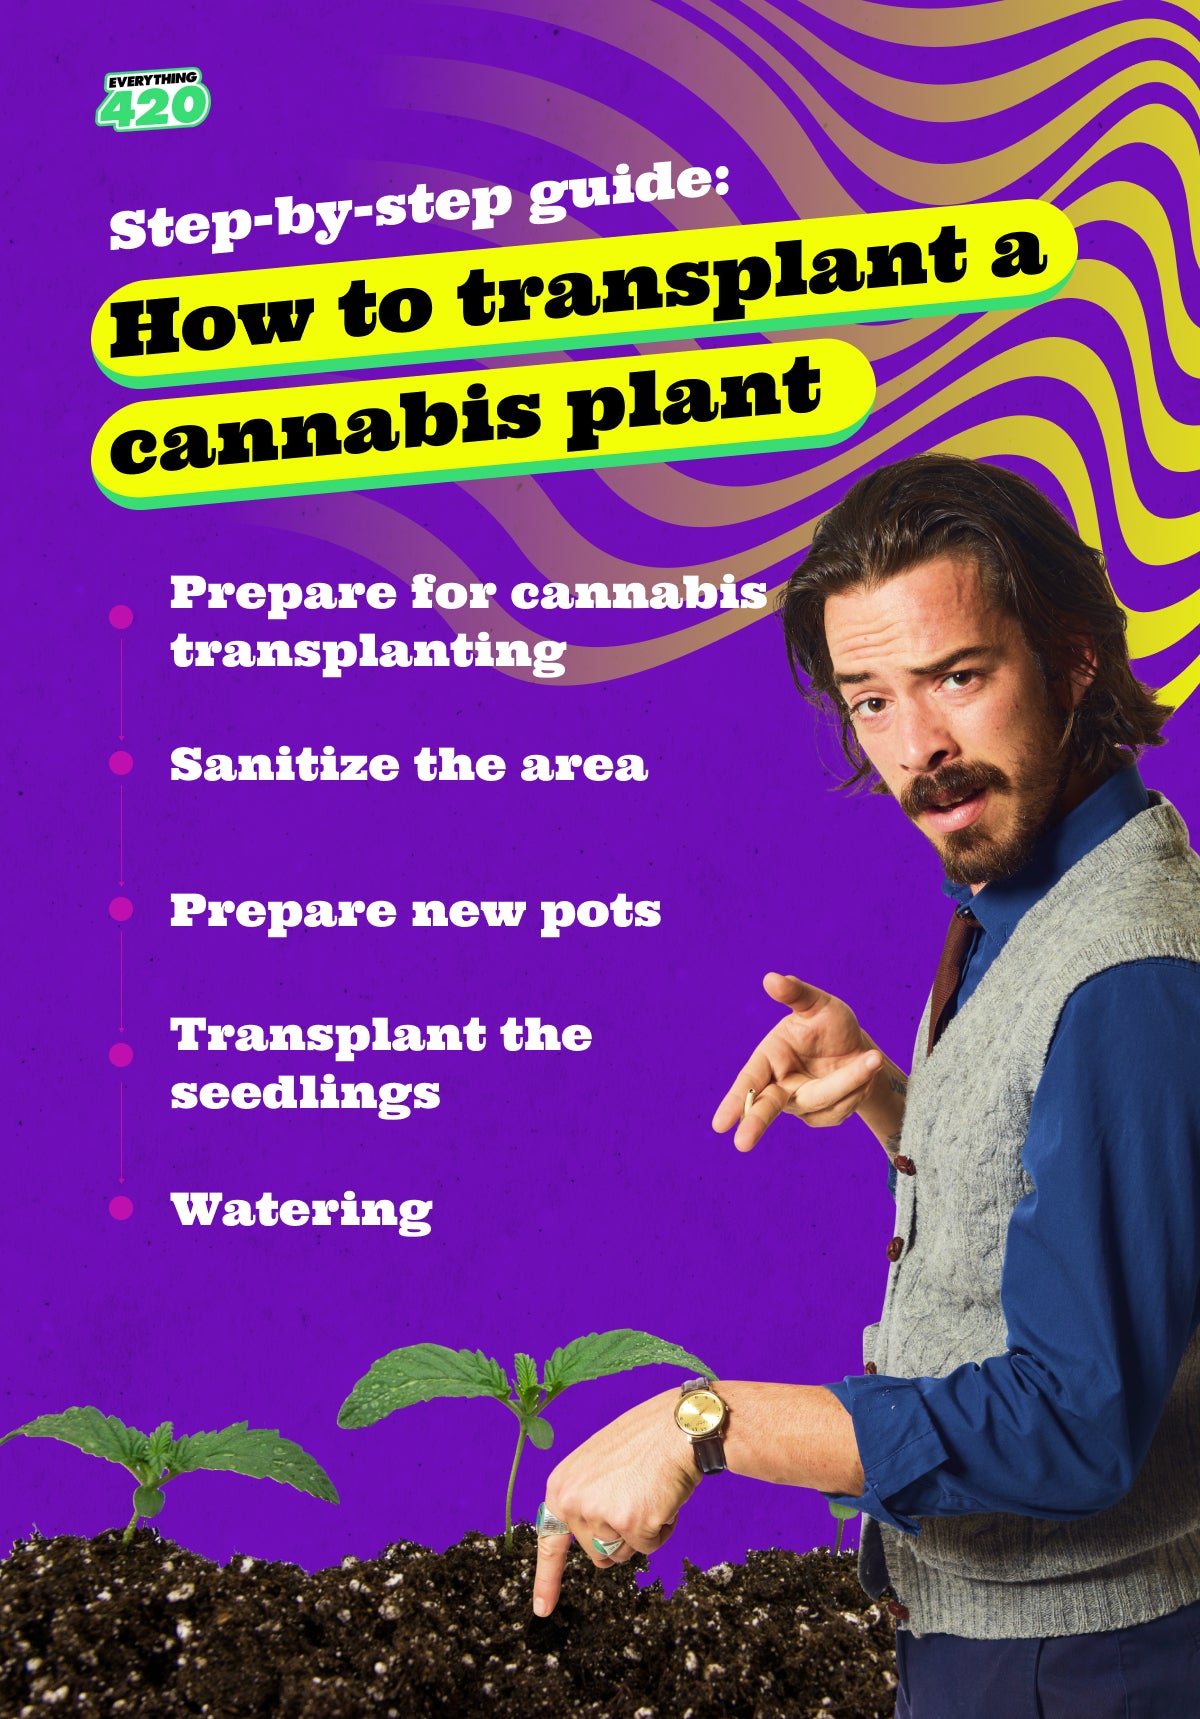 Step-by-step guide: How to transplant a cannabis plant